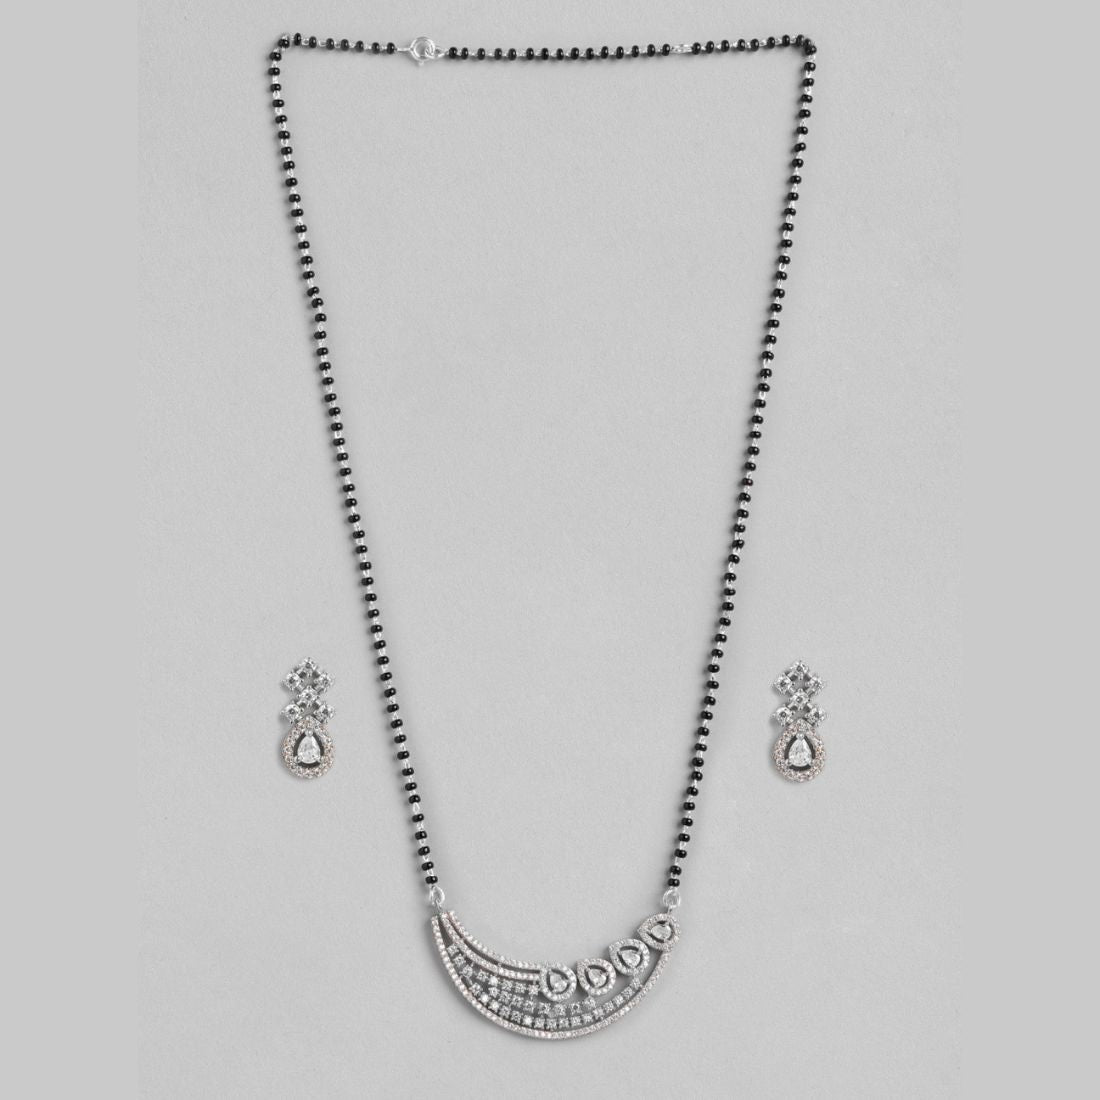 Ethereal Harmony Rhodium-Plated 925 Sterling Silver Jewelry Set